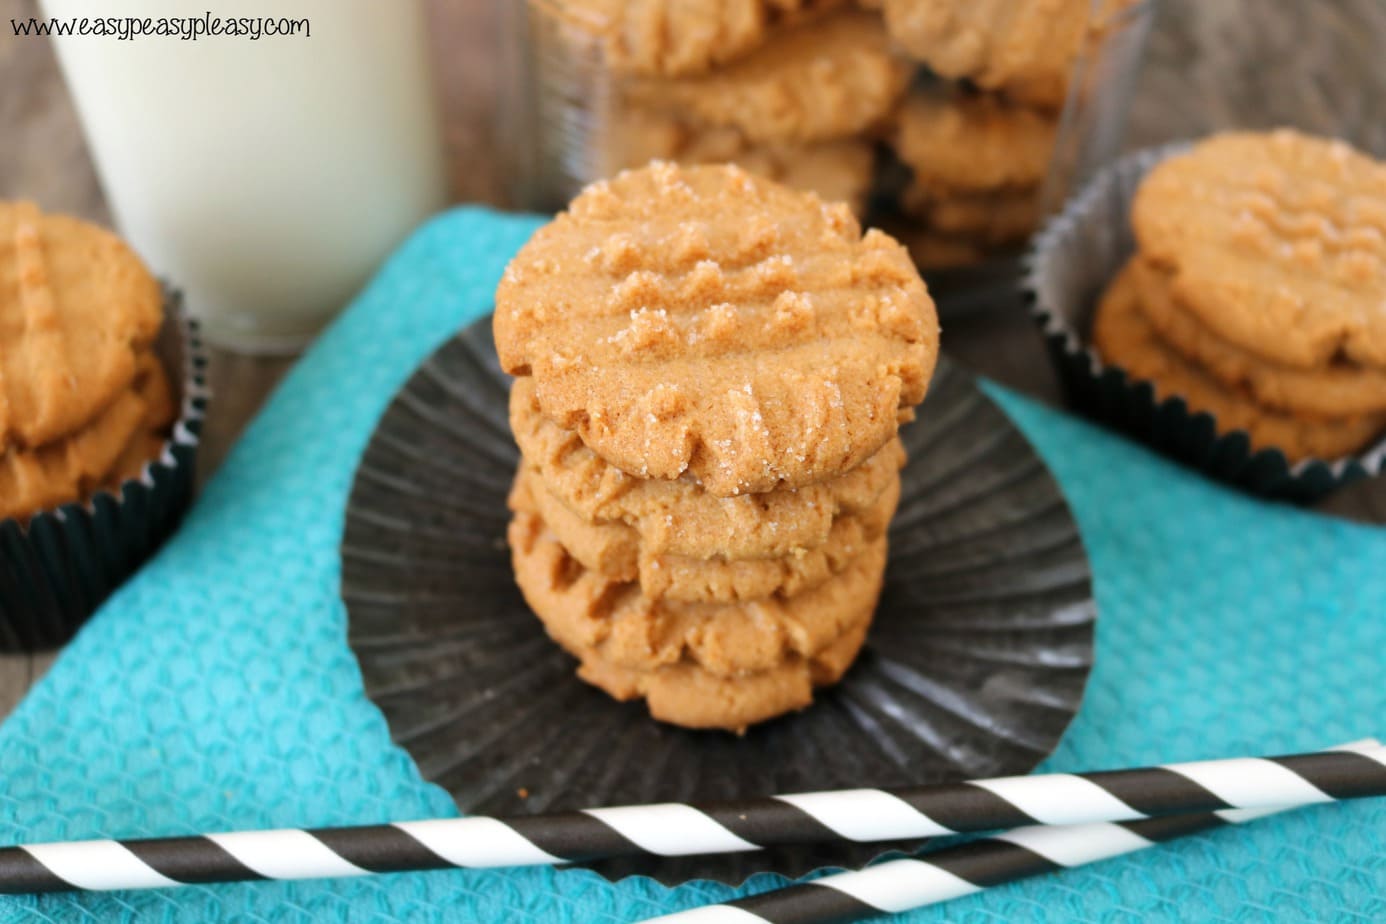 These quick and easy 3 Ingredient peanut butter cookies are perfect for satisfying your sweet tooth when you have limited ingredients in your pantry.